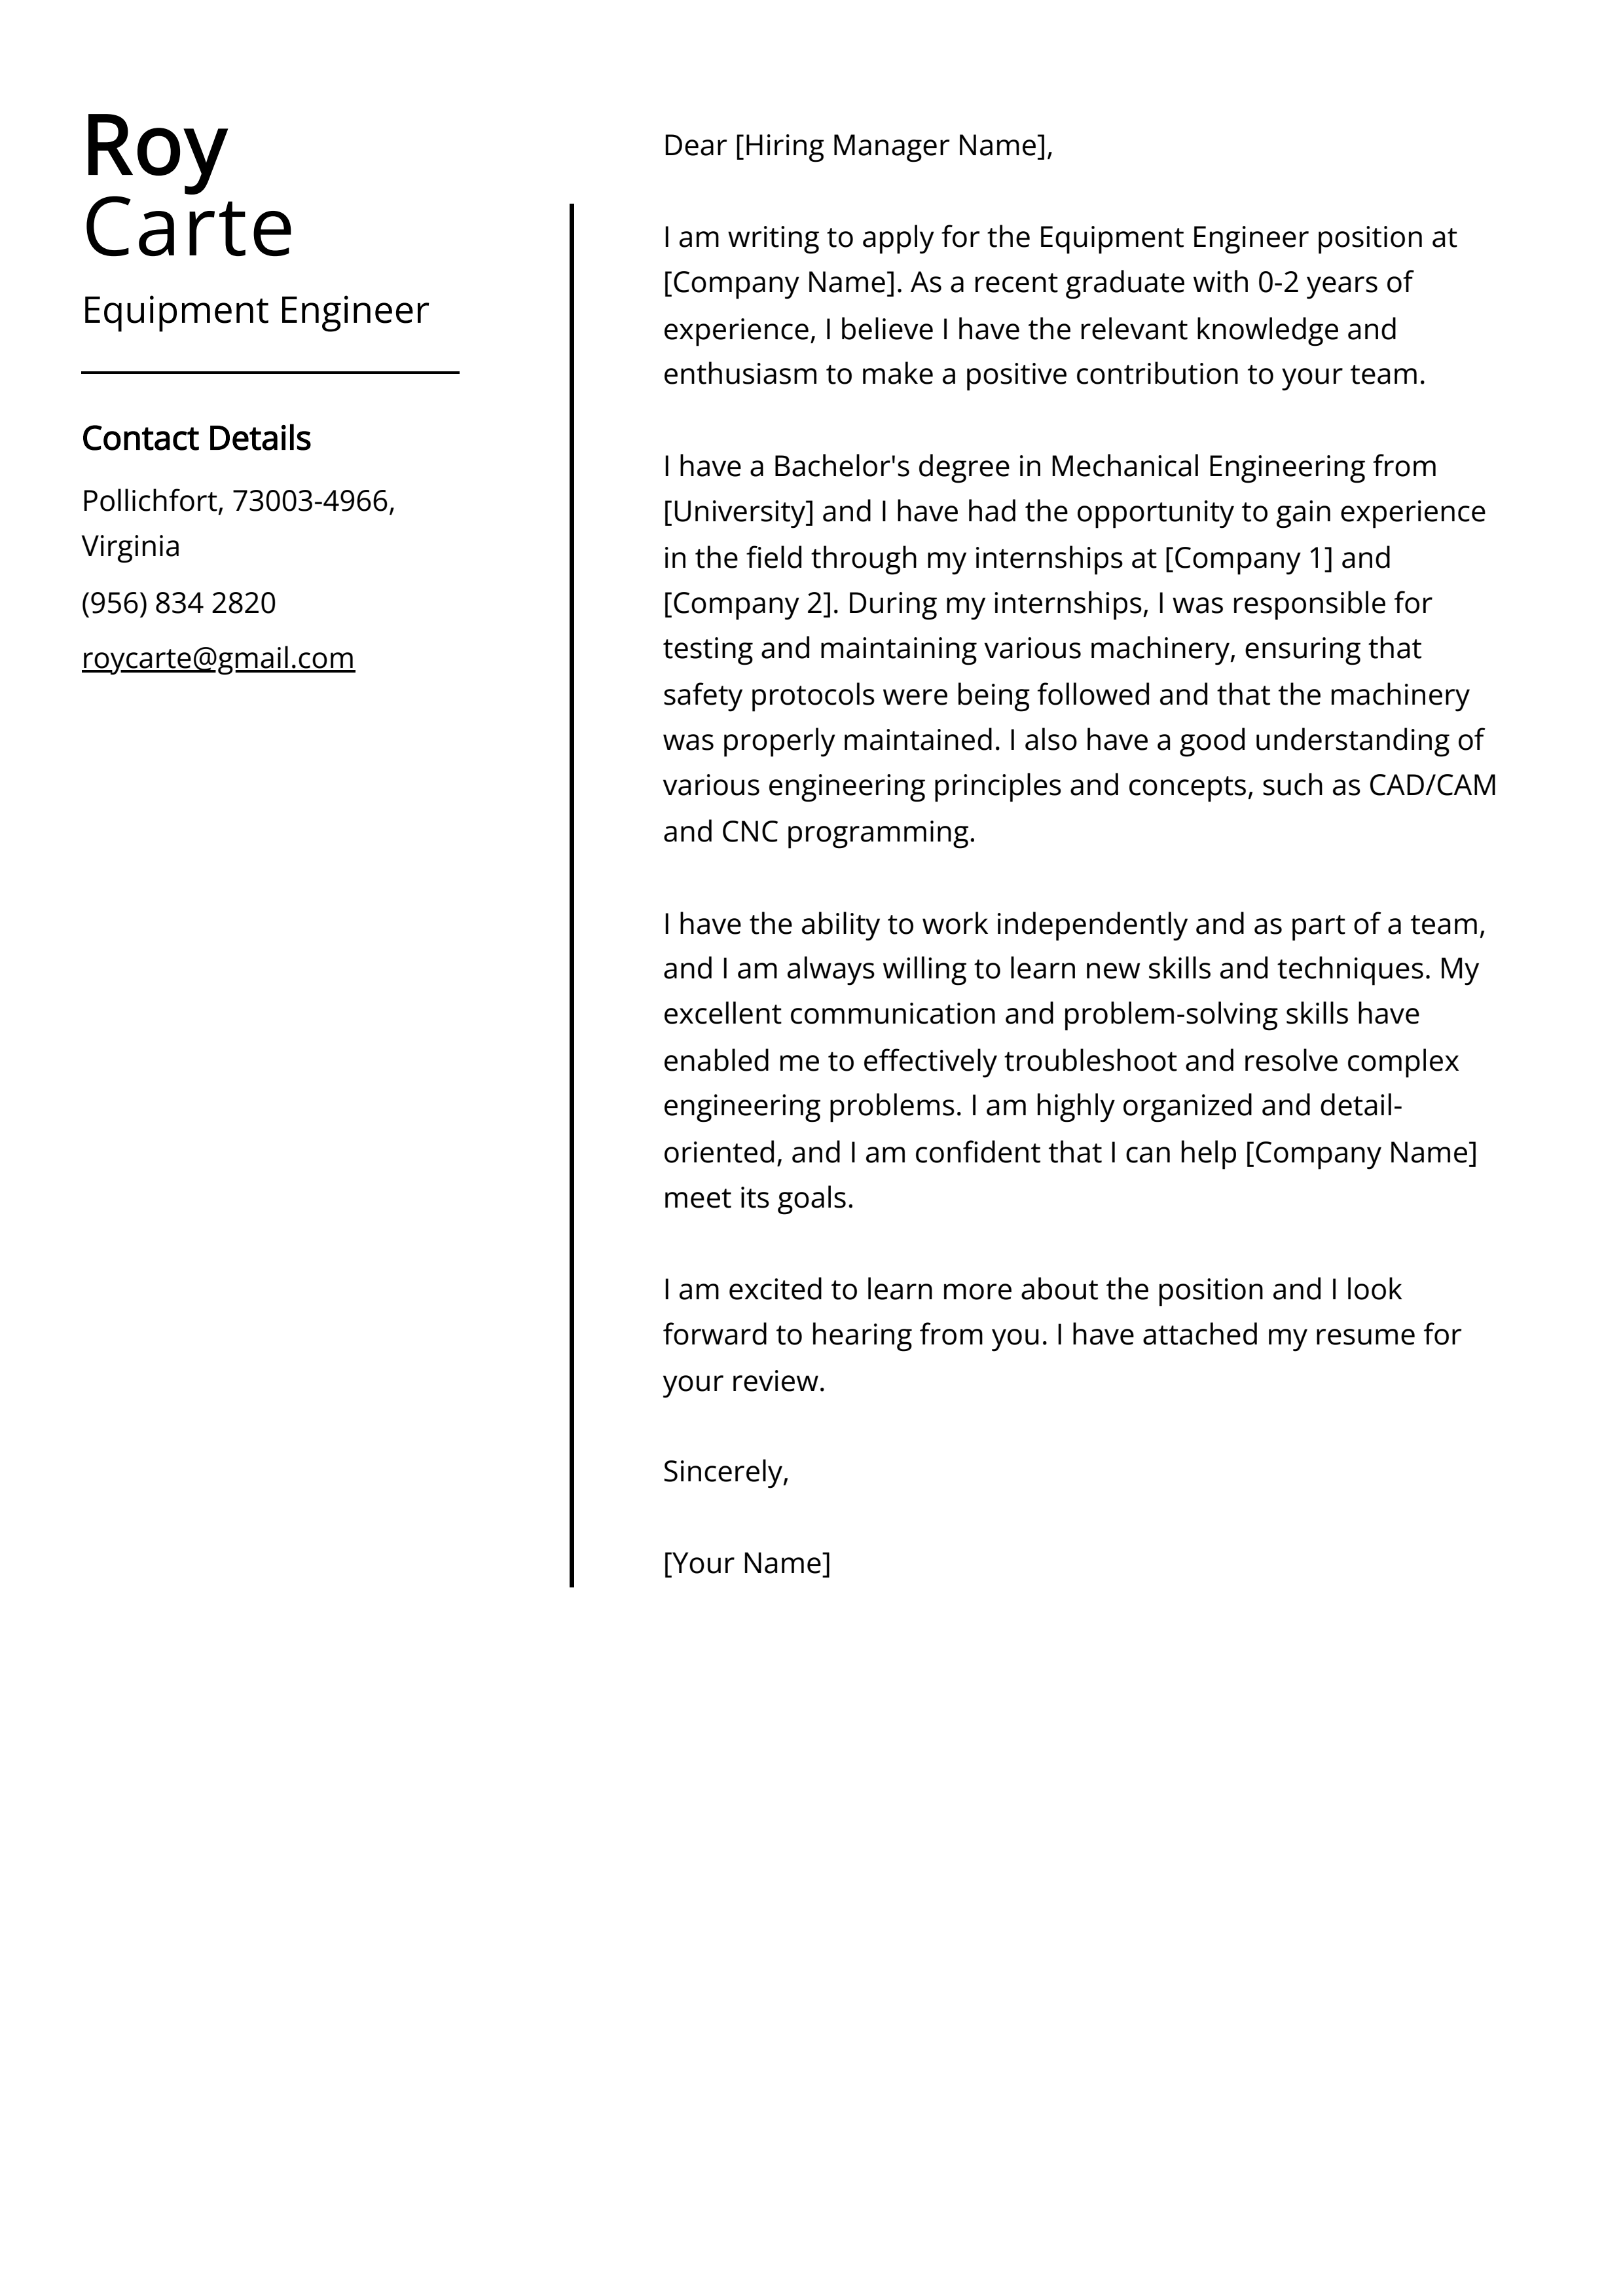 Equipment Engineer Cover Letter Example